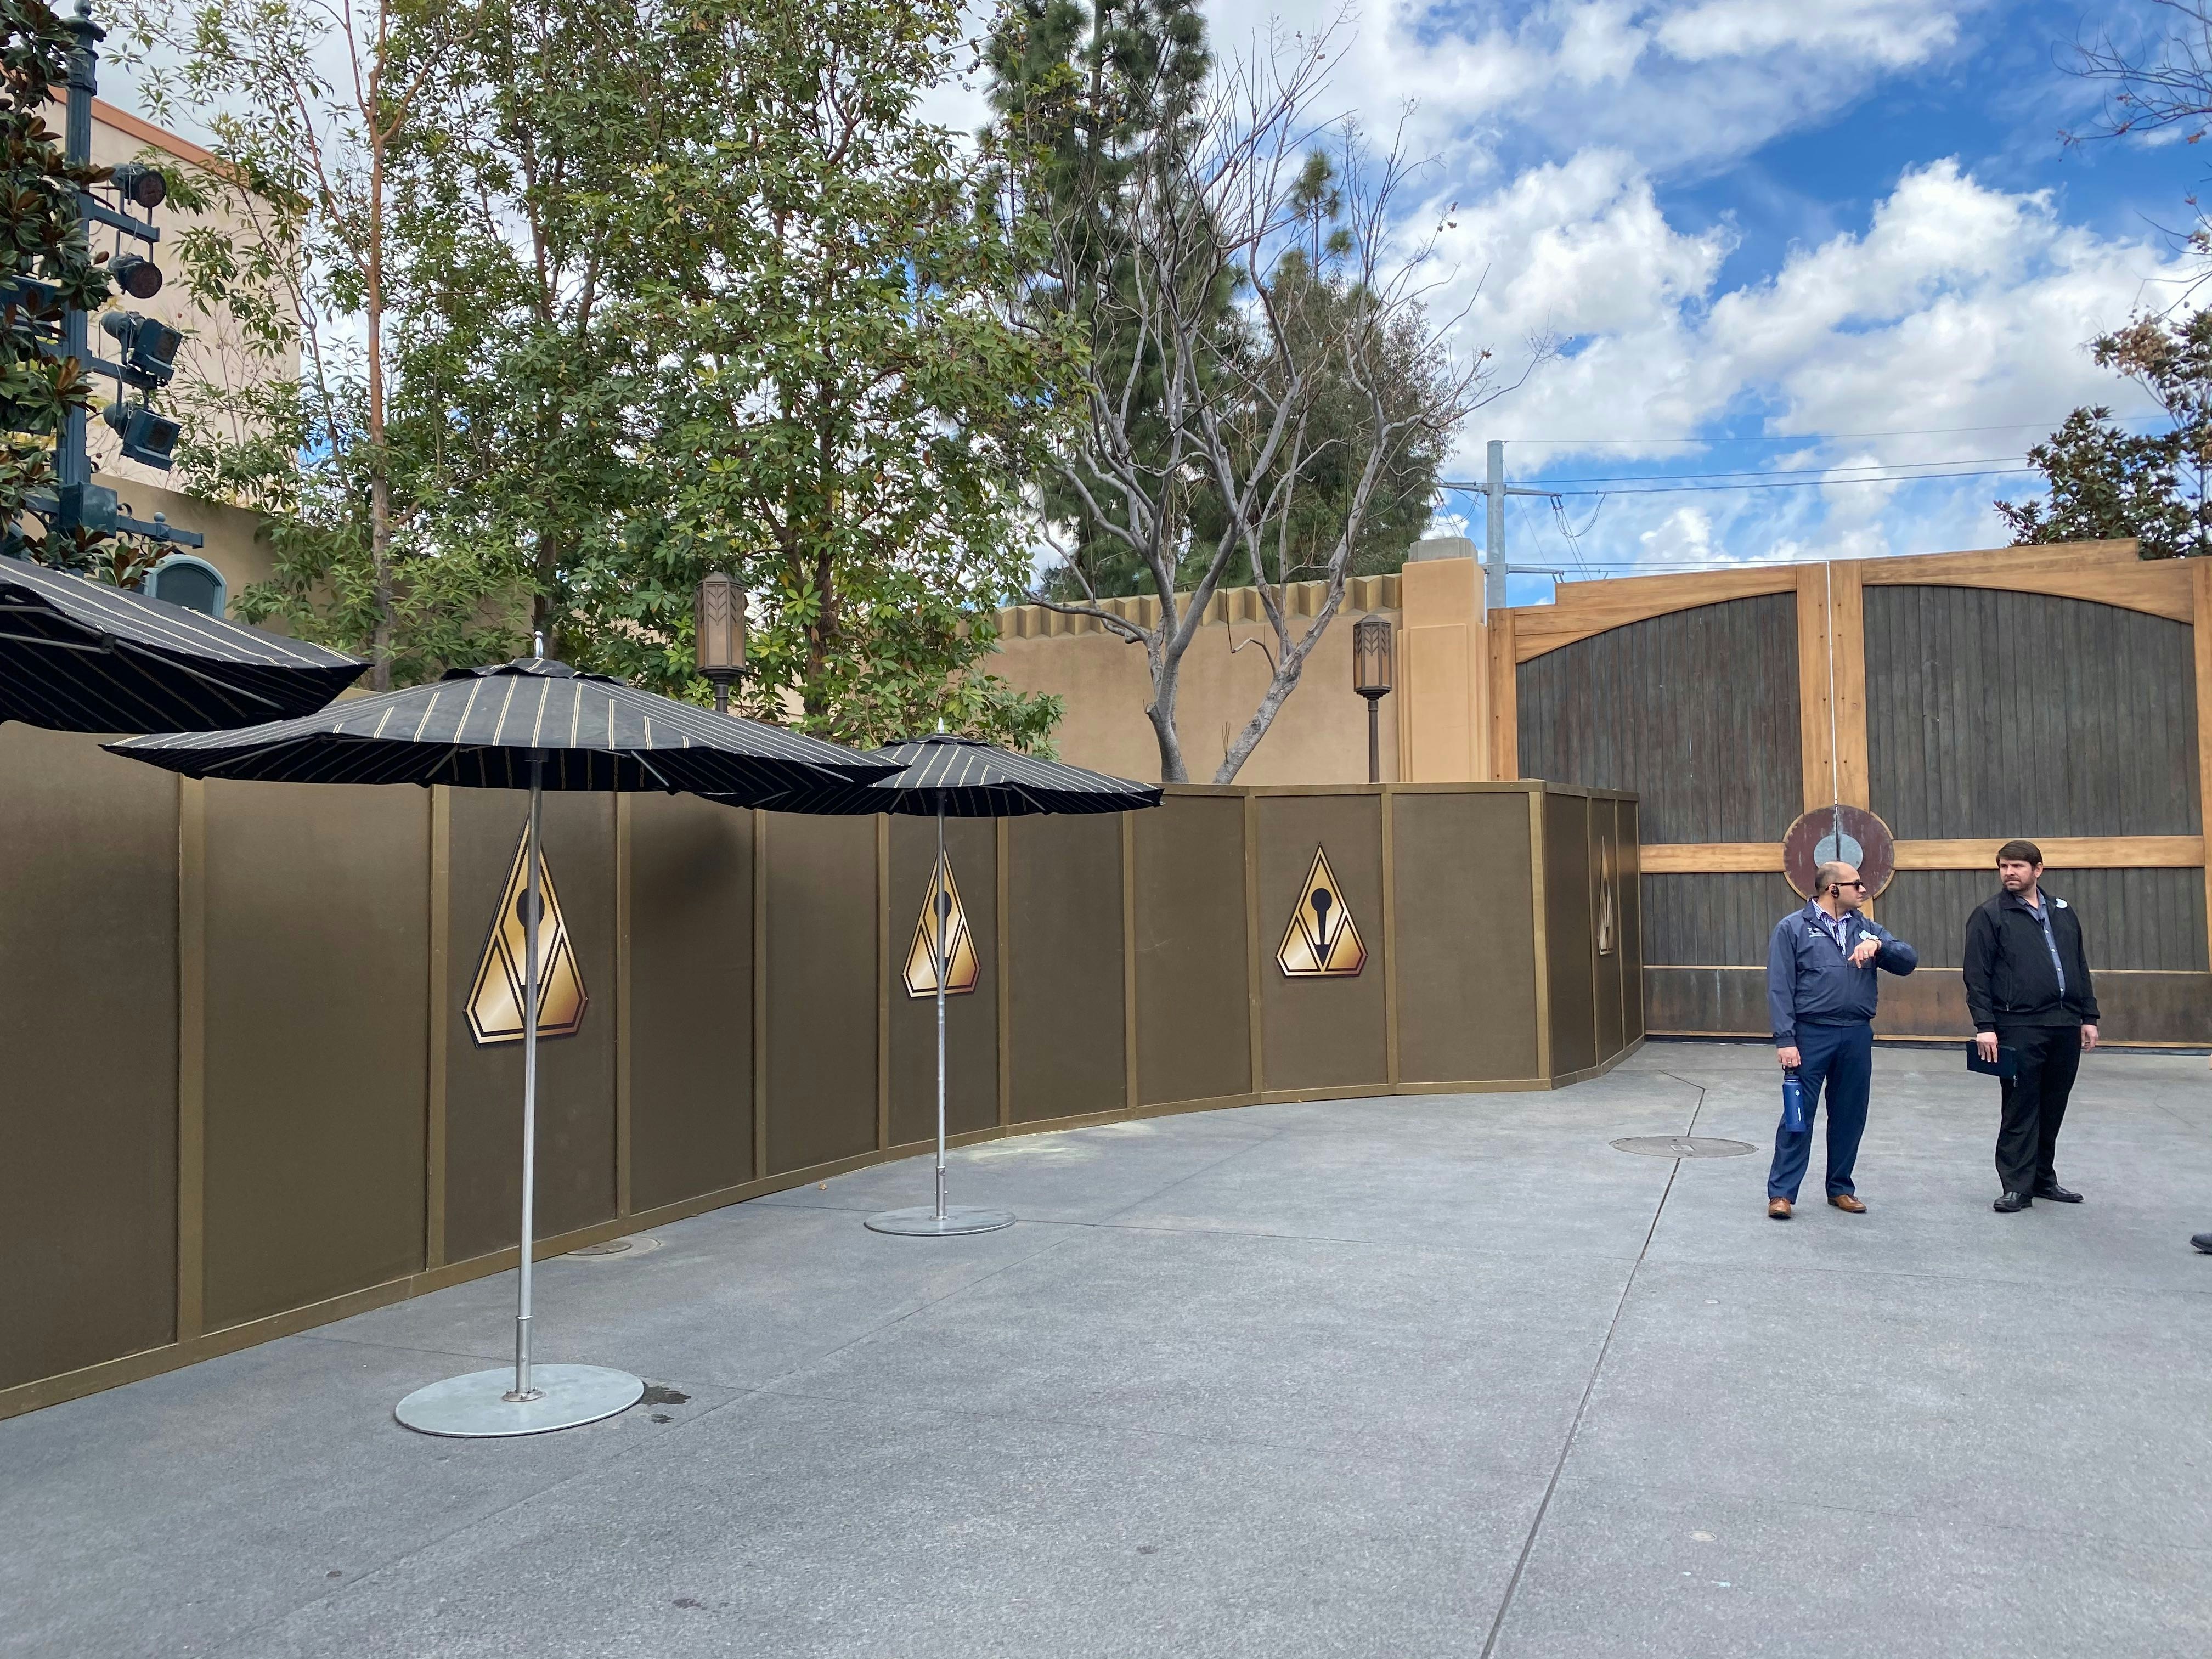 Construction Walls Go Up Outside of Guardians of the Galaxy - Mission: Breakout! at Disney California Adventure